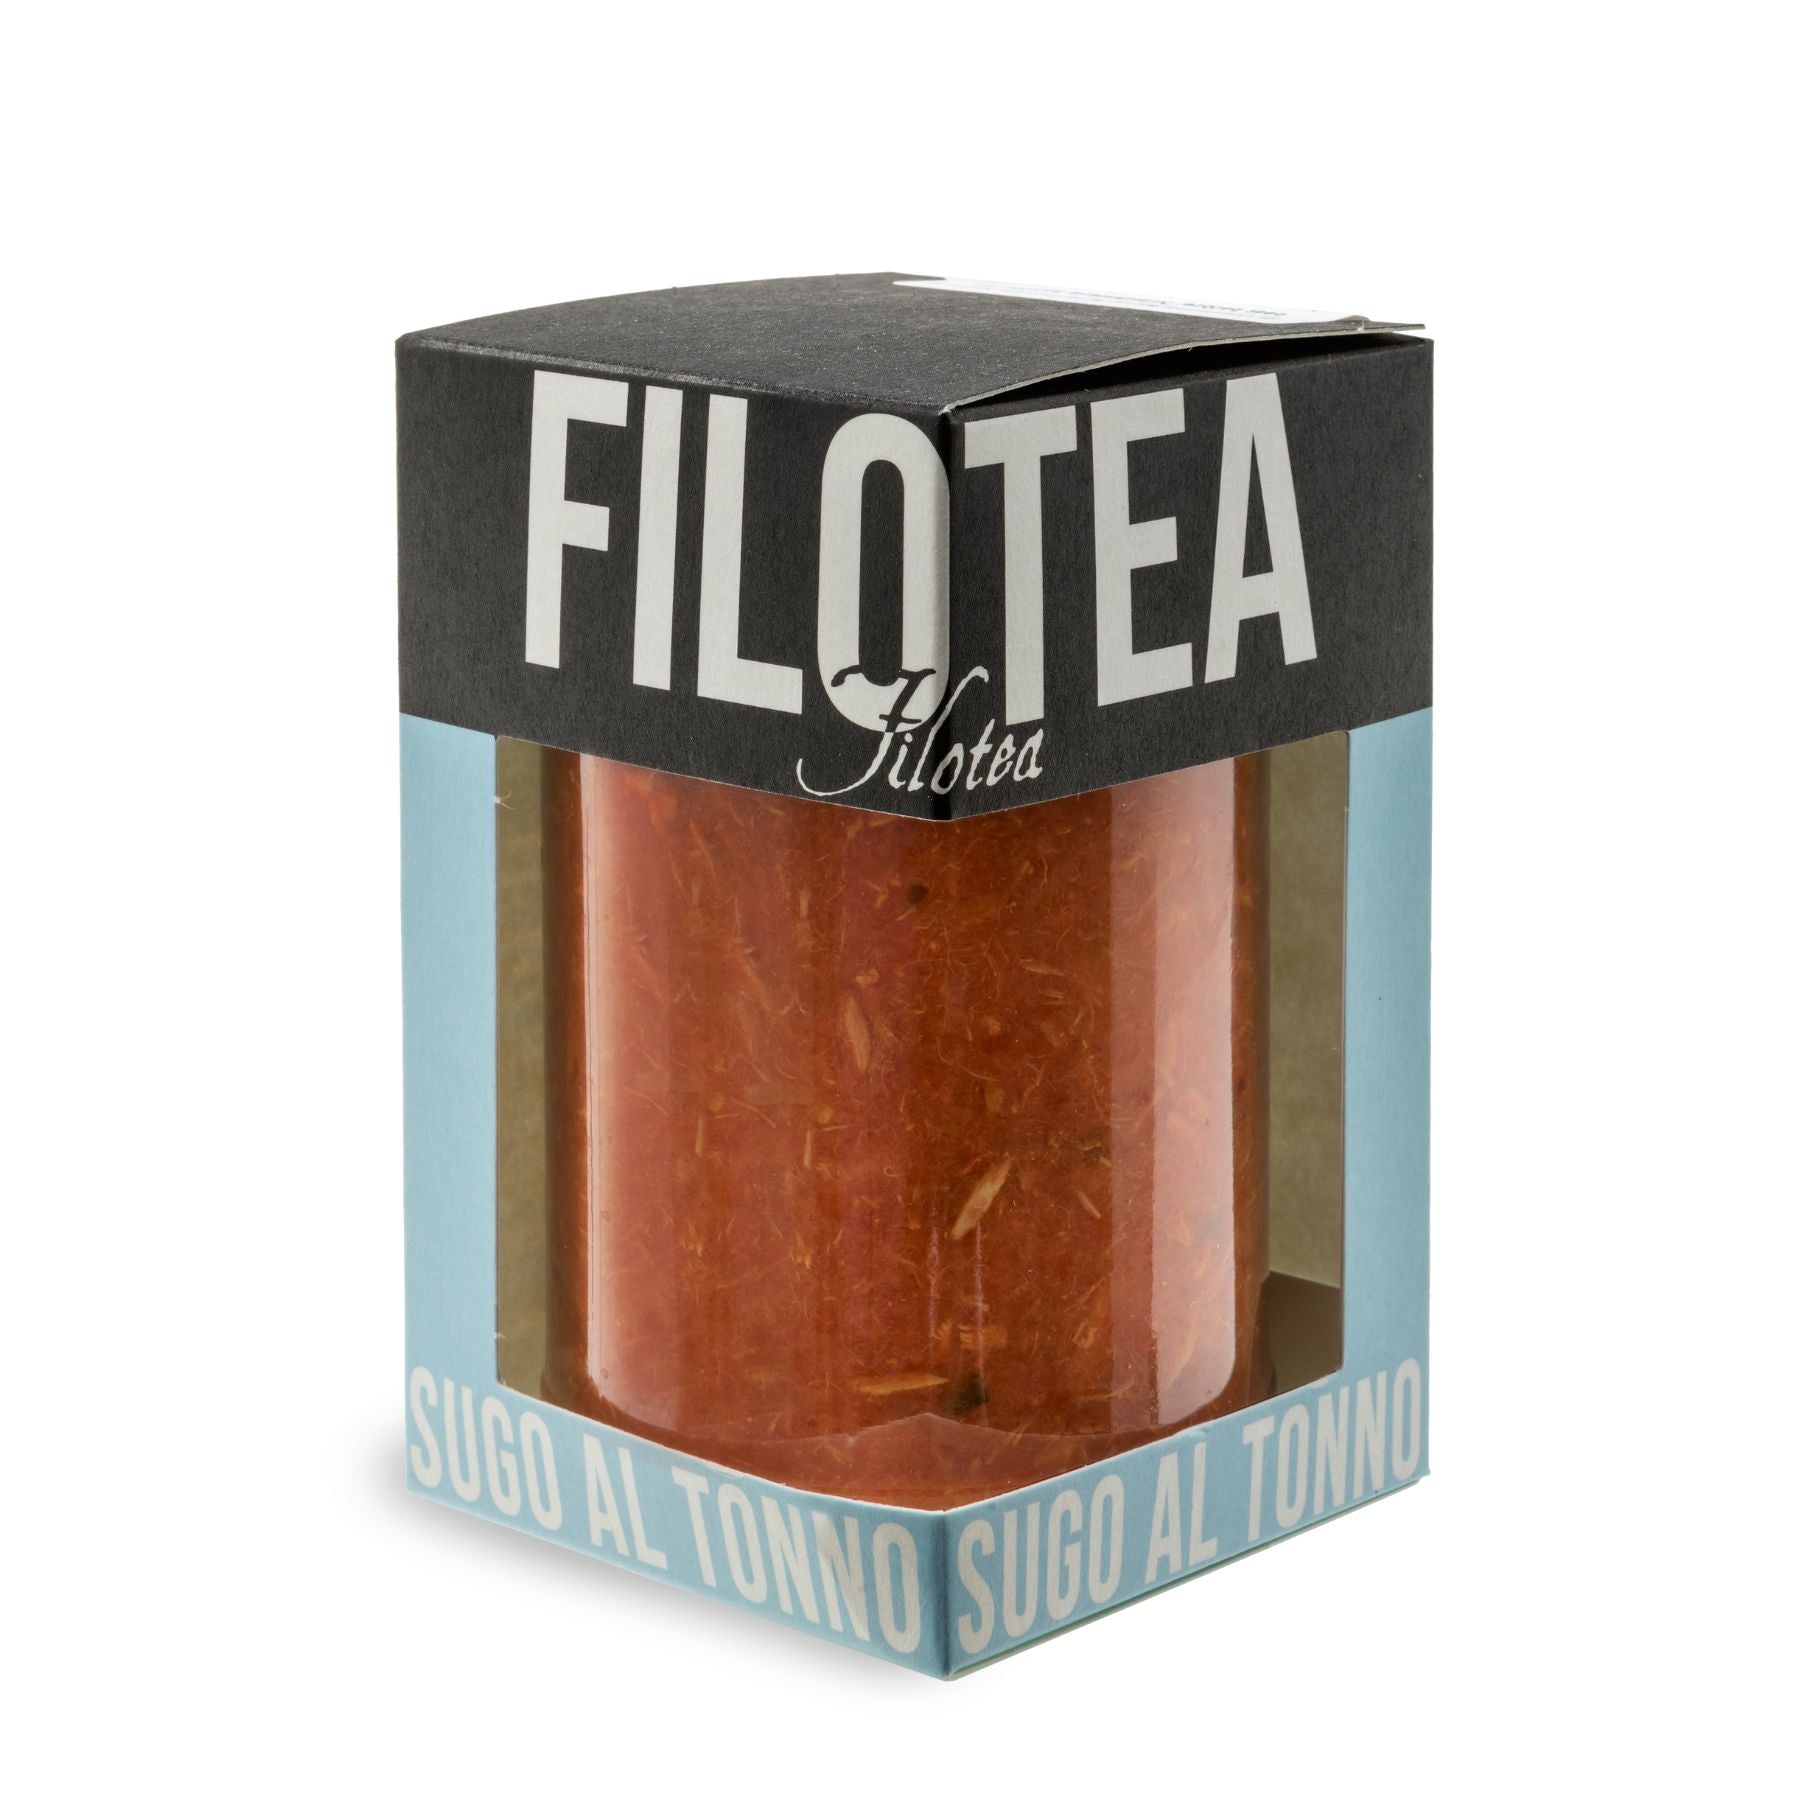 Filotea Tuna Pasta Sauce 280g | Imported and distributed in the UK by Just Gourmet Foods